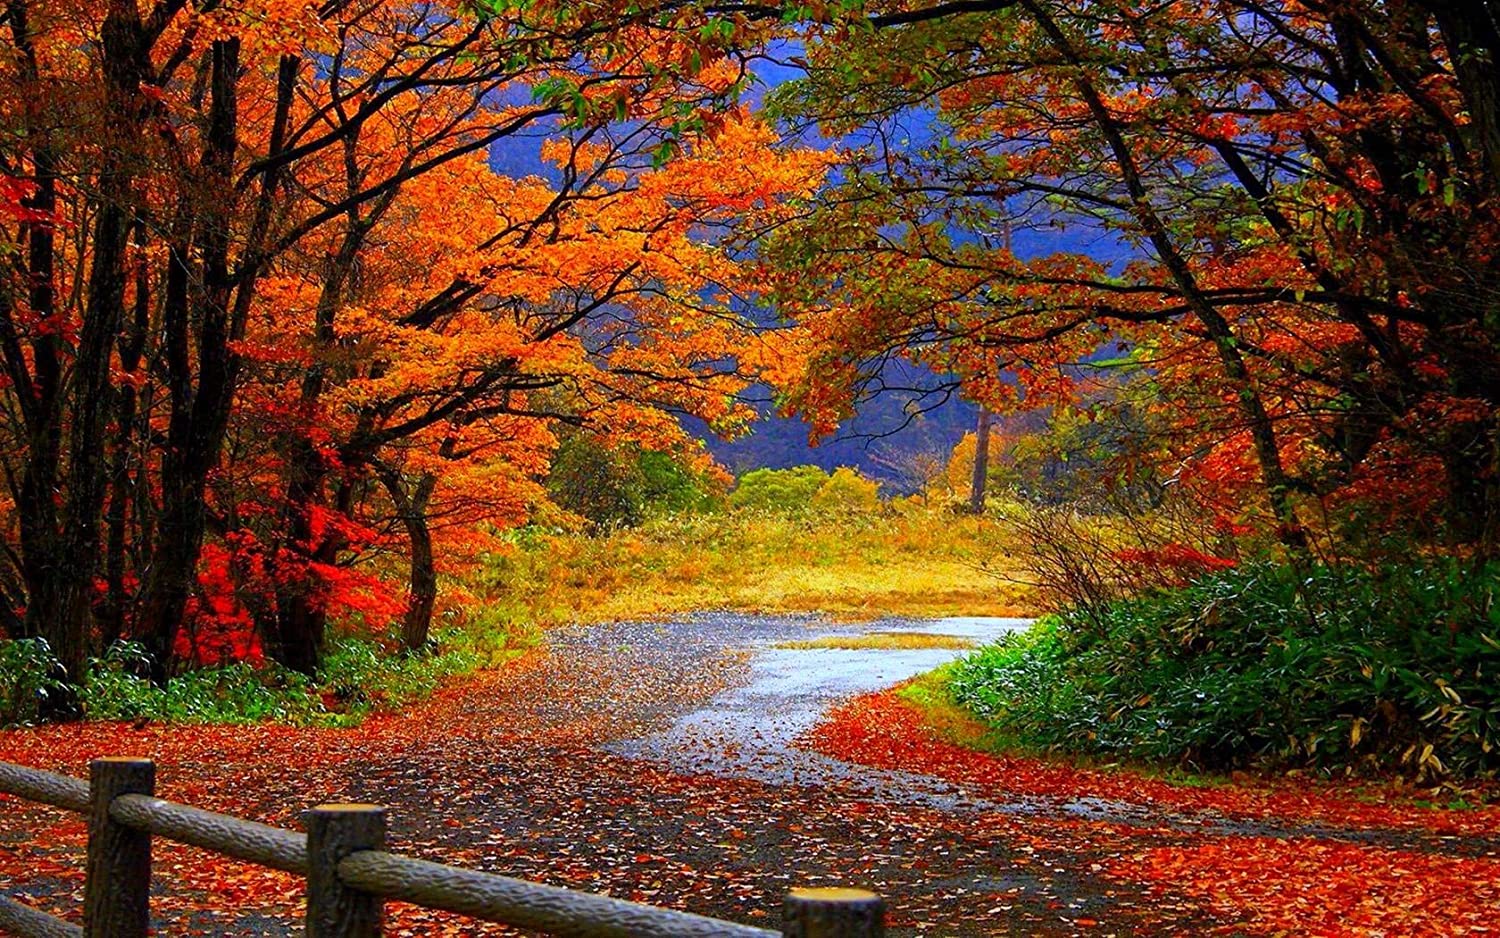 Buy Avikalp Exclusive Awi3274 Beautiful Road Falling Leaves Autumn Colorful Trees Nature Scenery Full HD Wallpaper (5 x 4 ft) Online at Low Prices in India